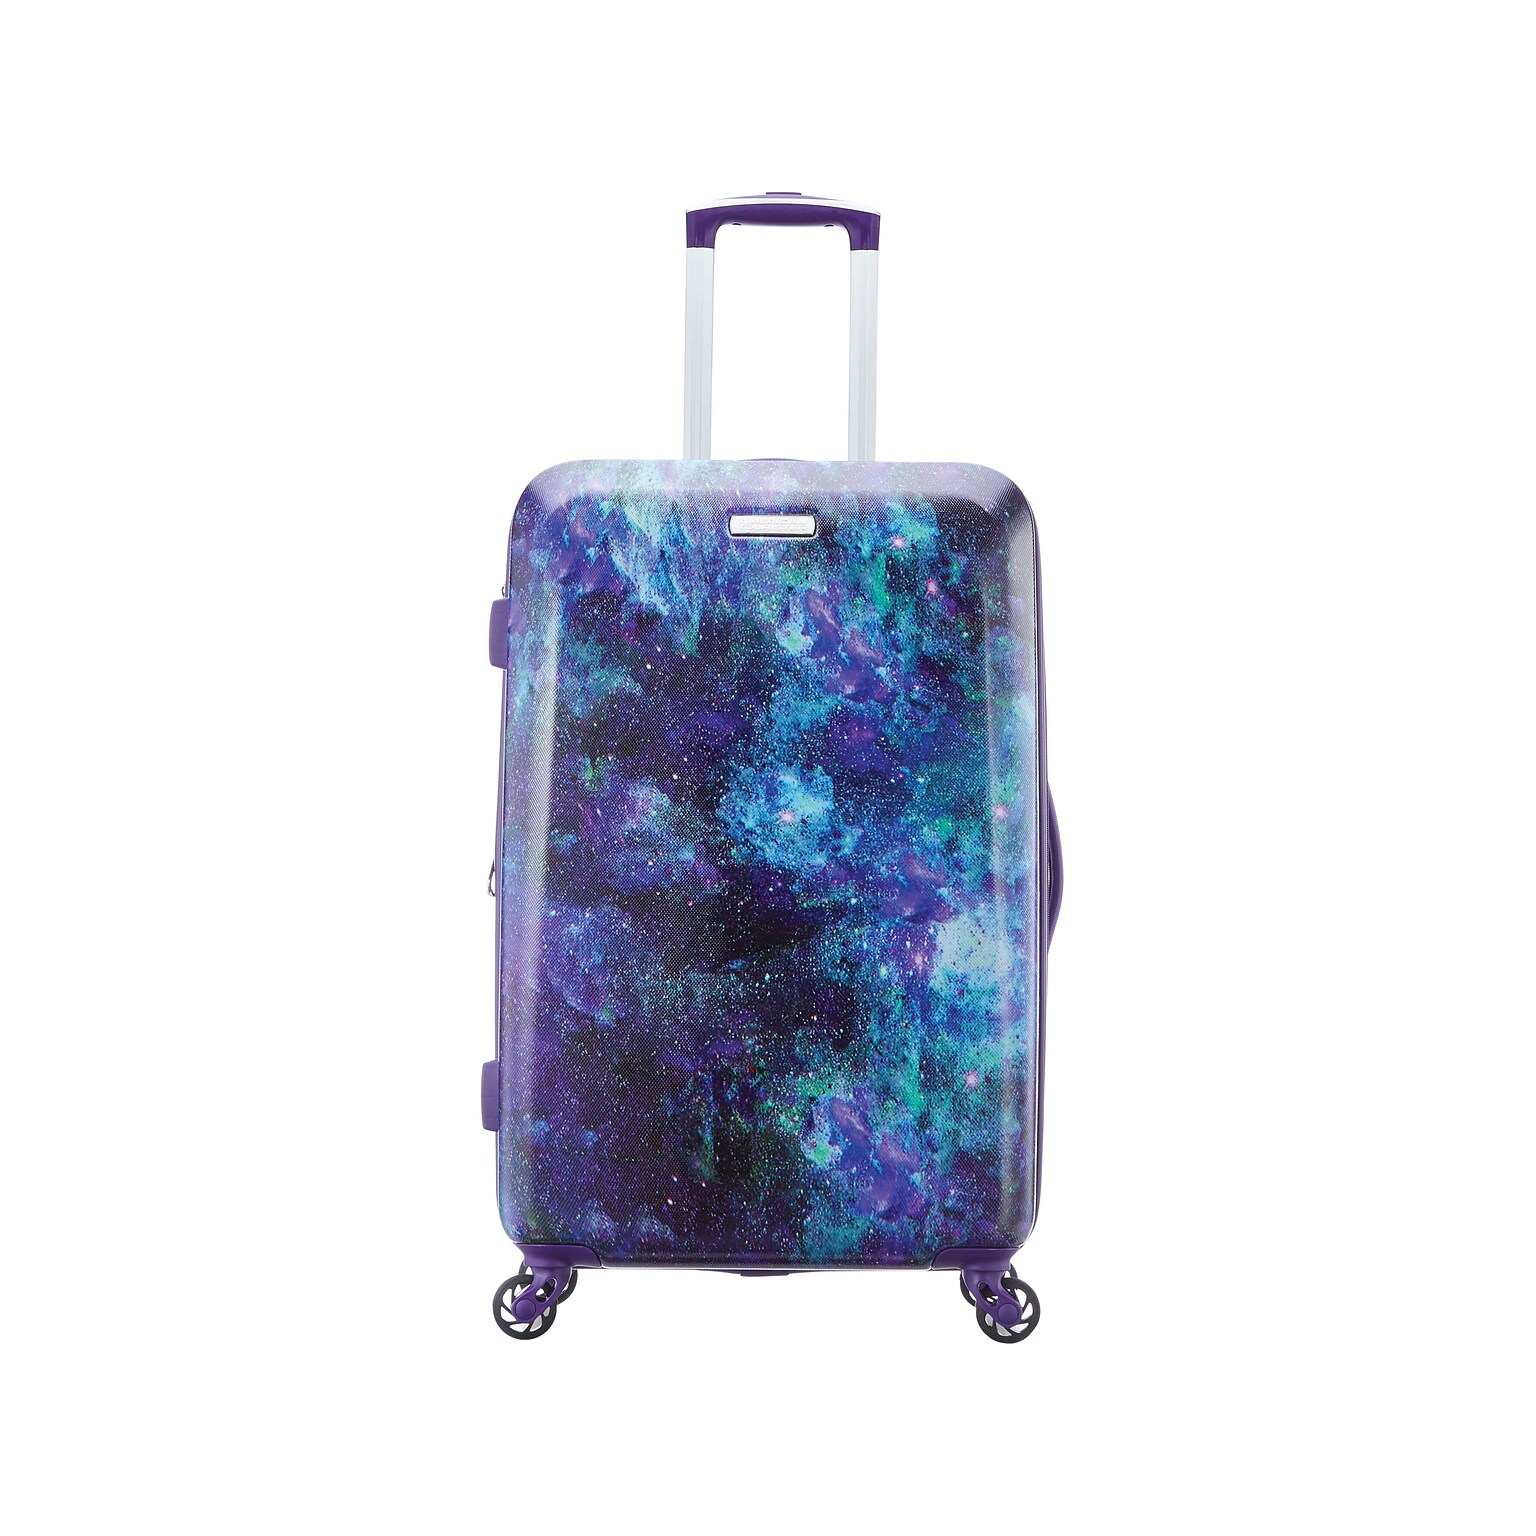 American Tourister Moonlight 27.55 Hardside Cosmos Suitcase, 4-Wheeled Spinner, Cosmos (92505-6418)